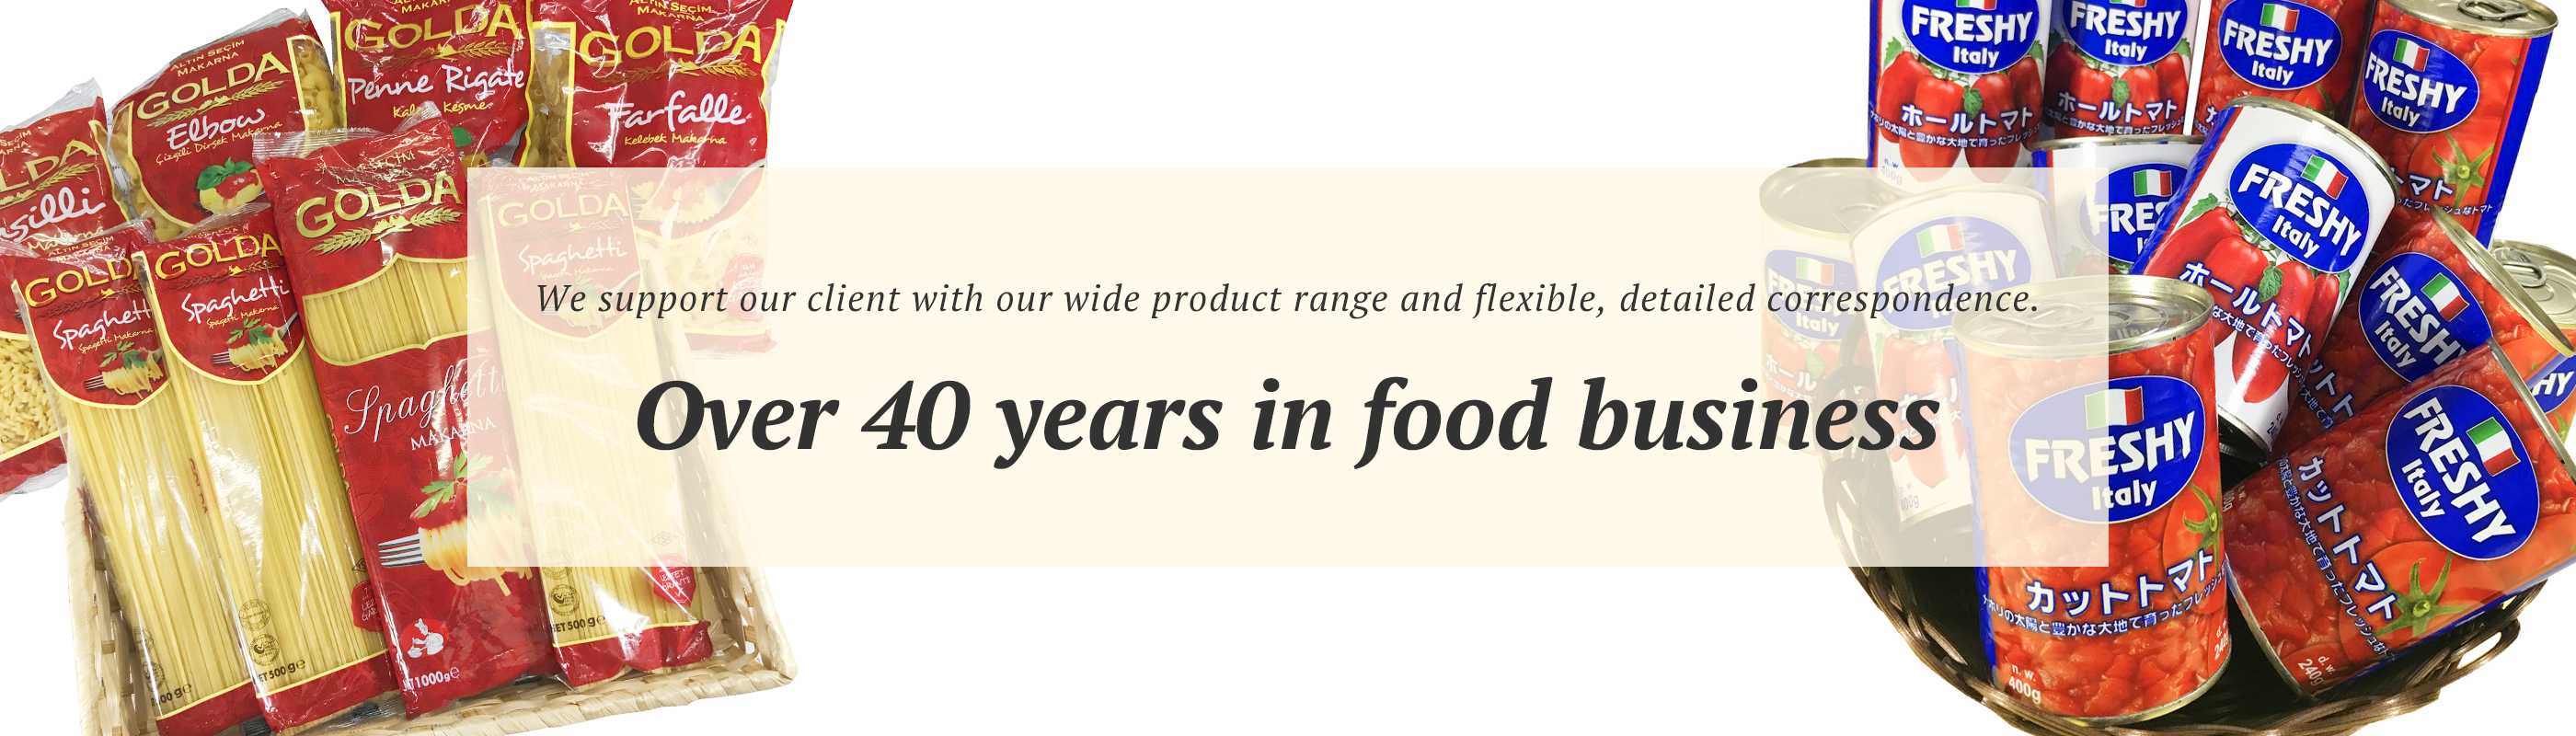 We support our client with our wide product range and flexible, detailed correspondence.　Over 40 years in food business